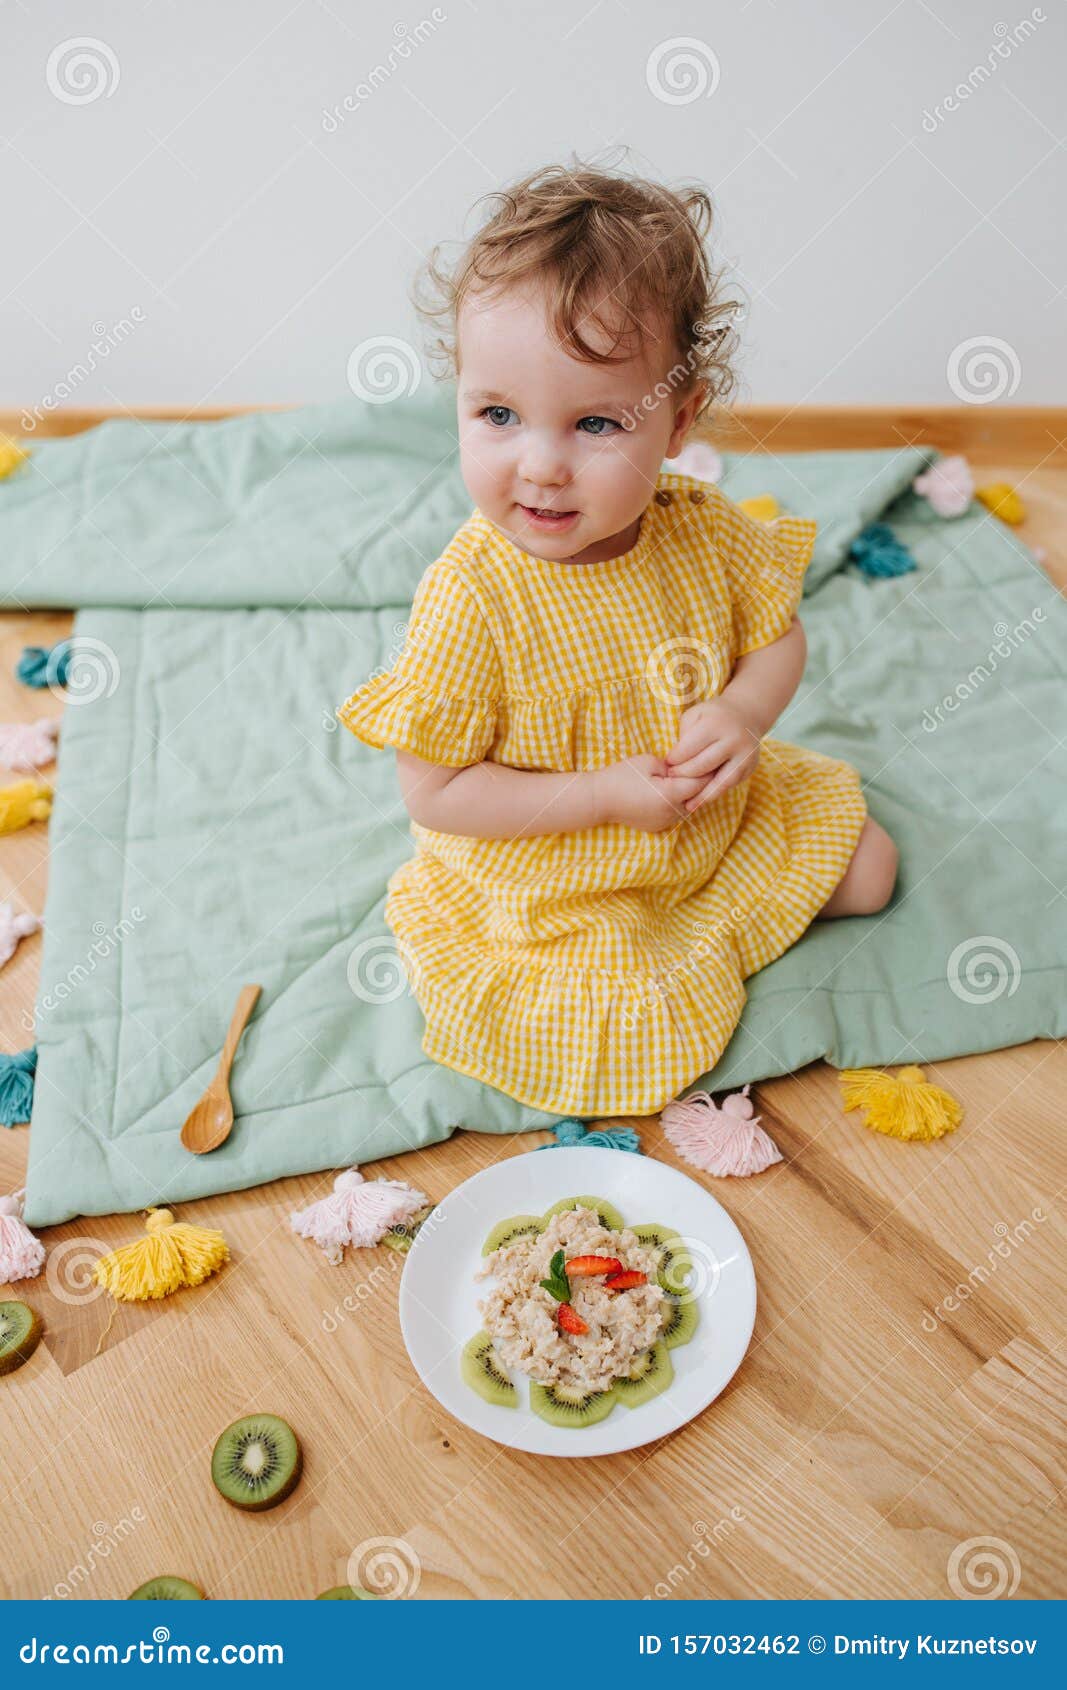 Very Cute Baby Eat Oatmeal with Kiwi Stock Photo - Image of baby ...